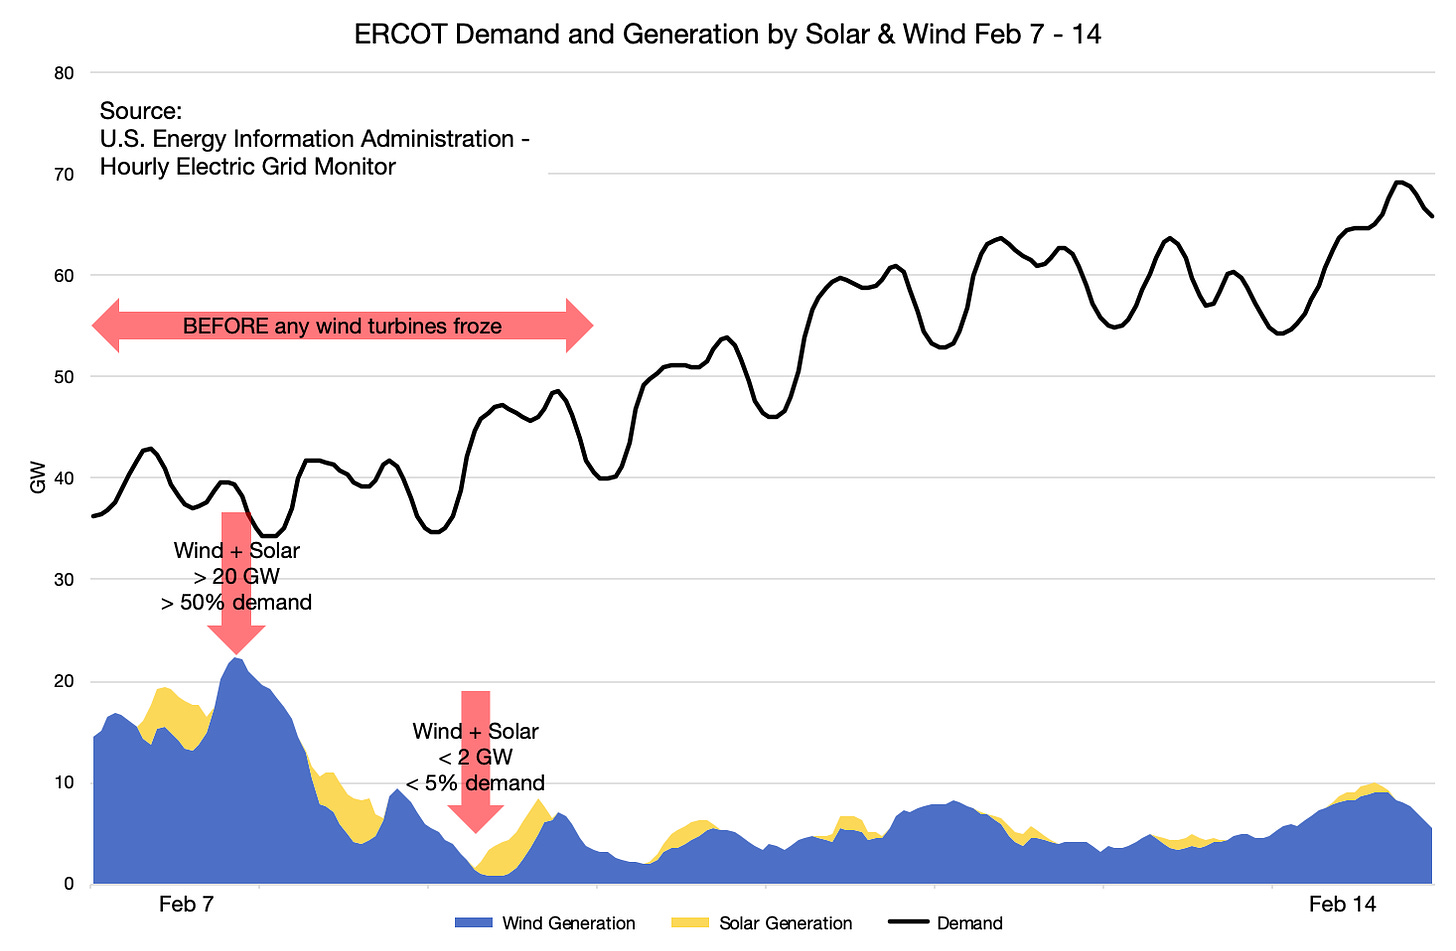 ERCOT Demond and generation by solar and wind Feb 7 - 14